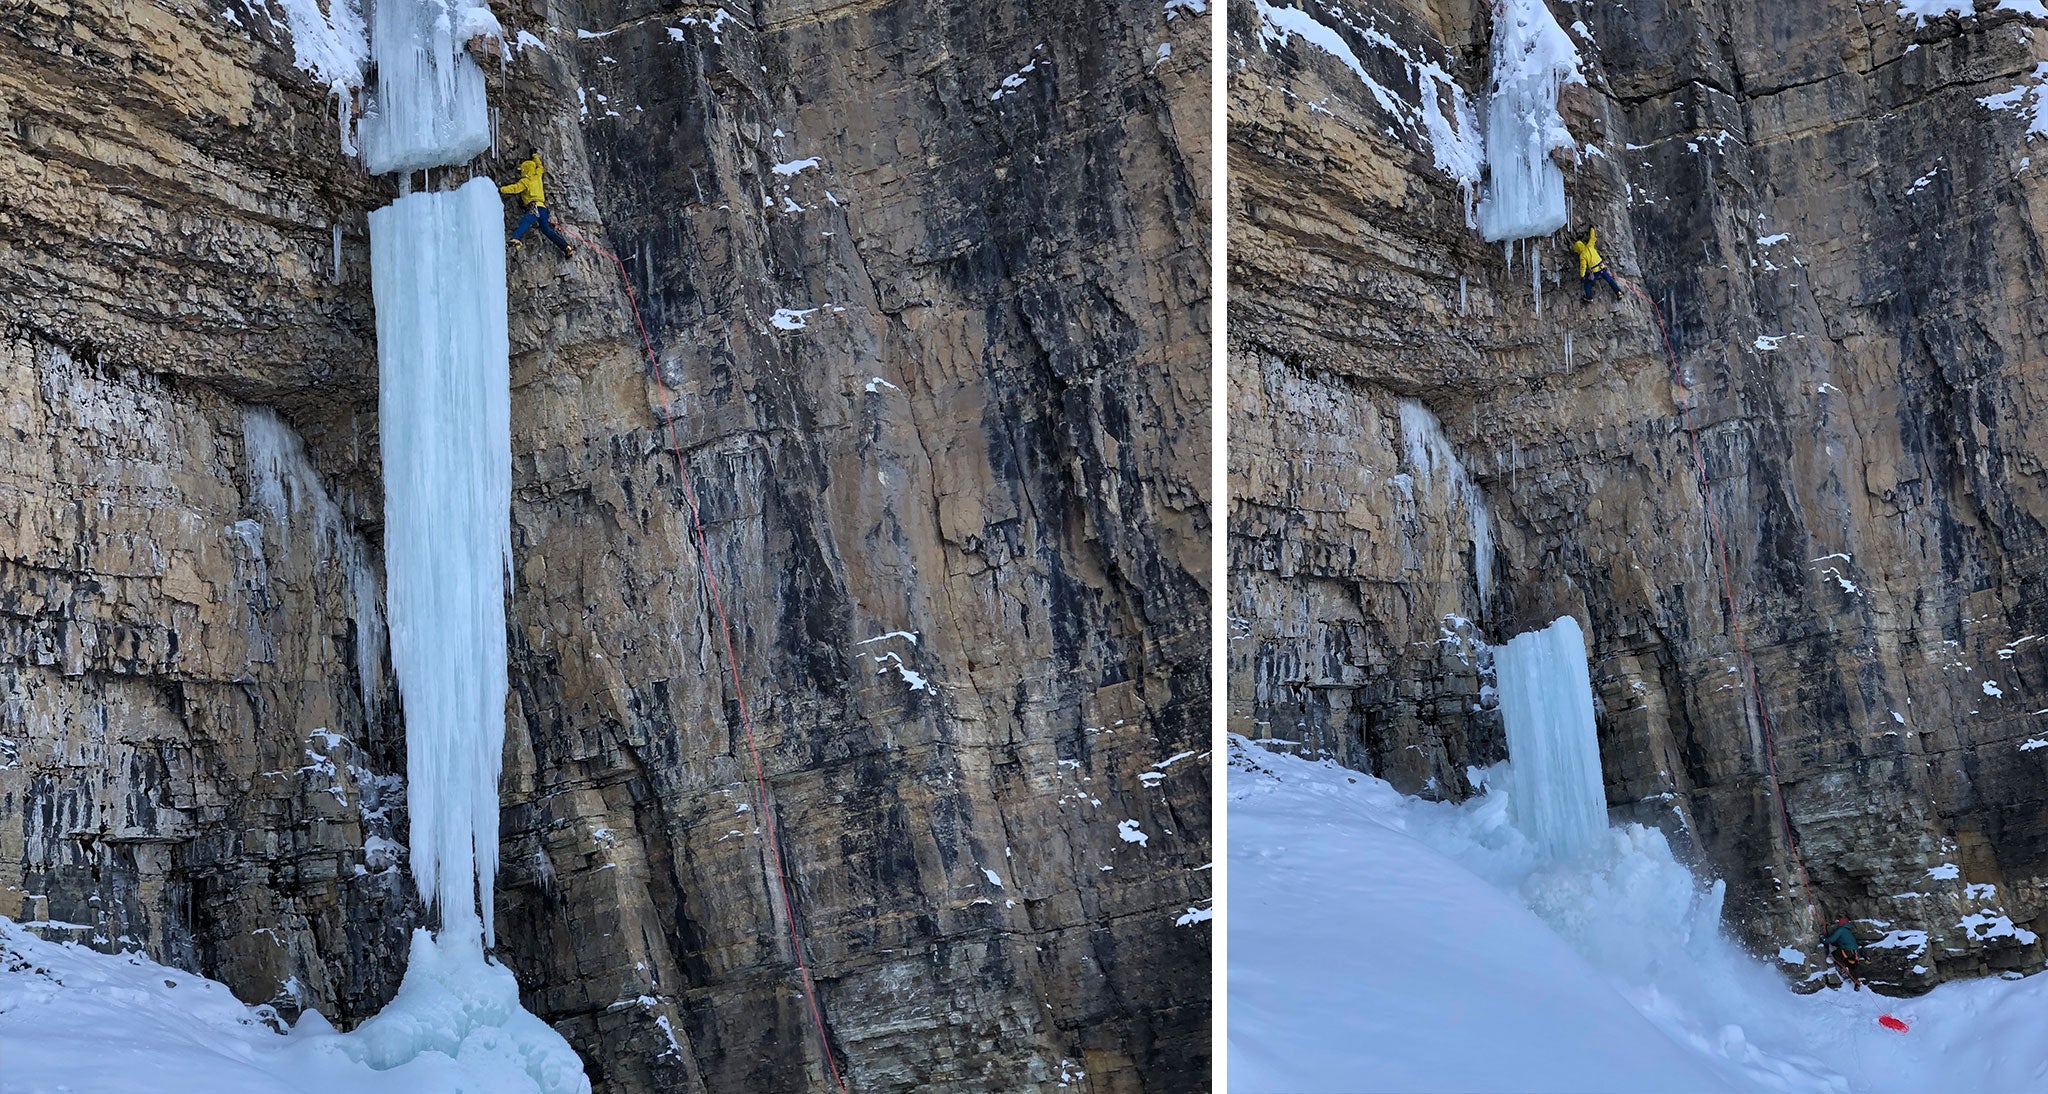 Ice climber dry tooling beside a frozen waterfall